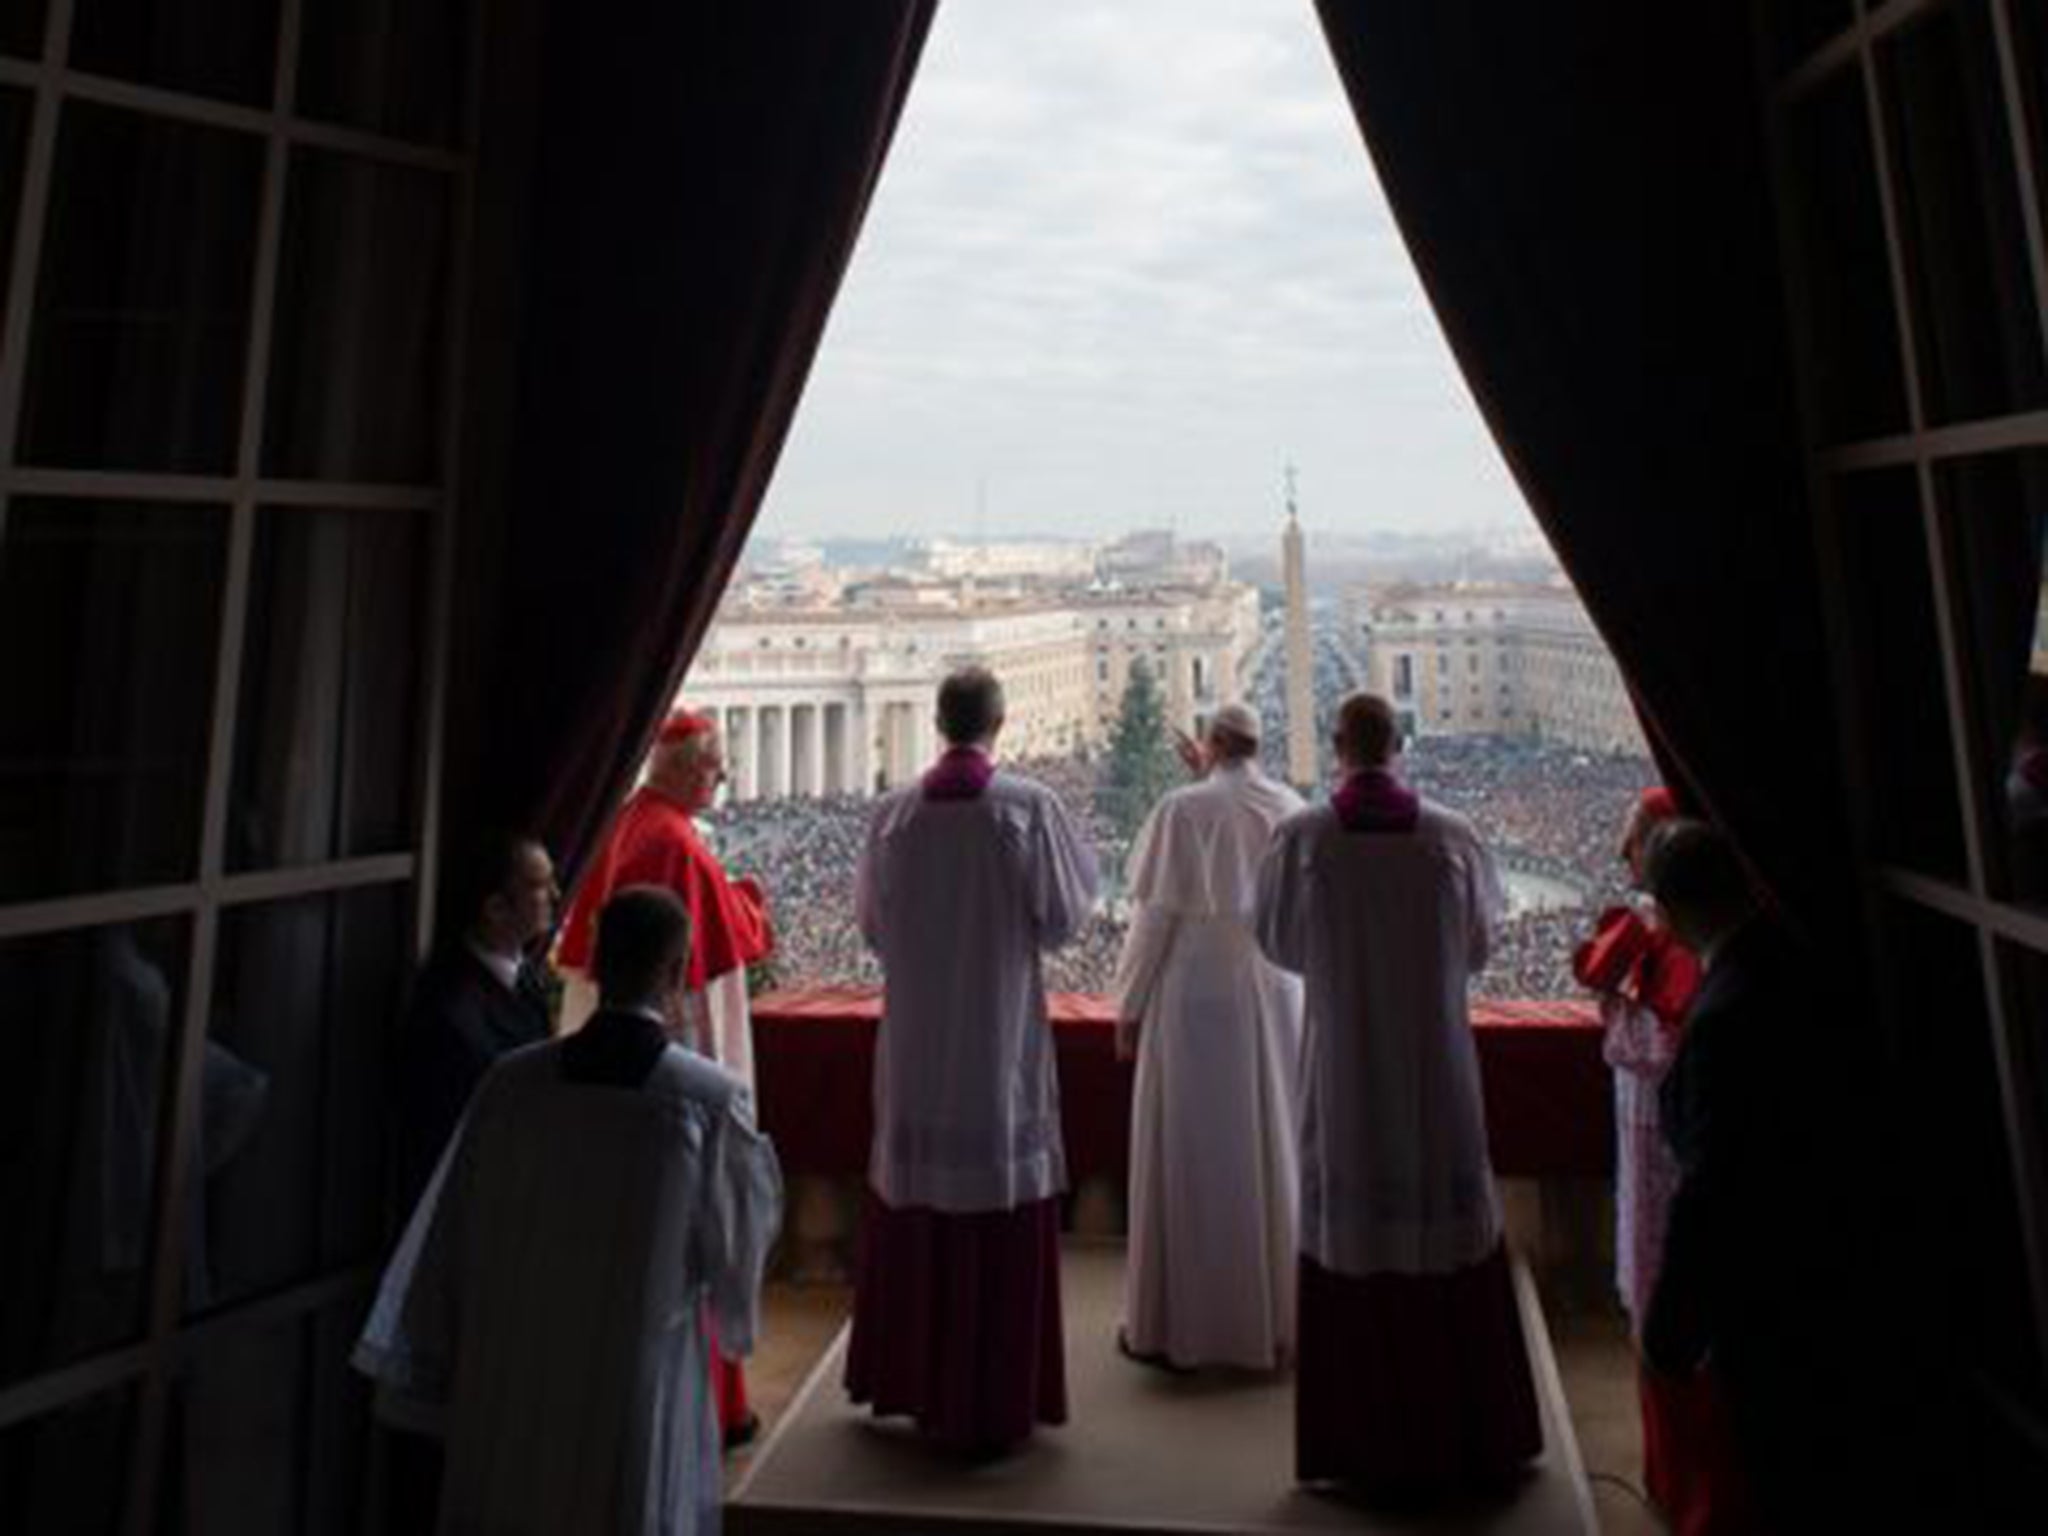 Pope Francis giving the traditional “Urbi et Orbi” blessing from the balcony of St Peter’s Basilica